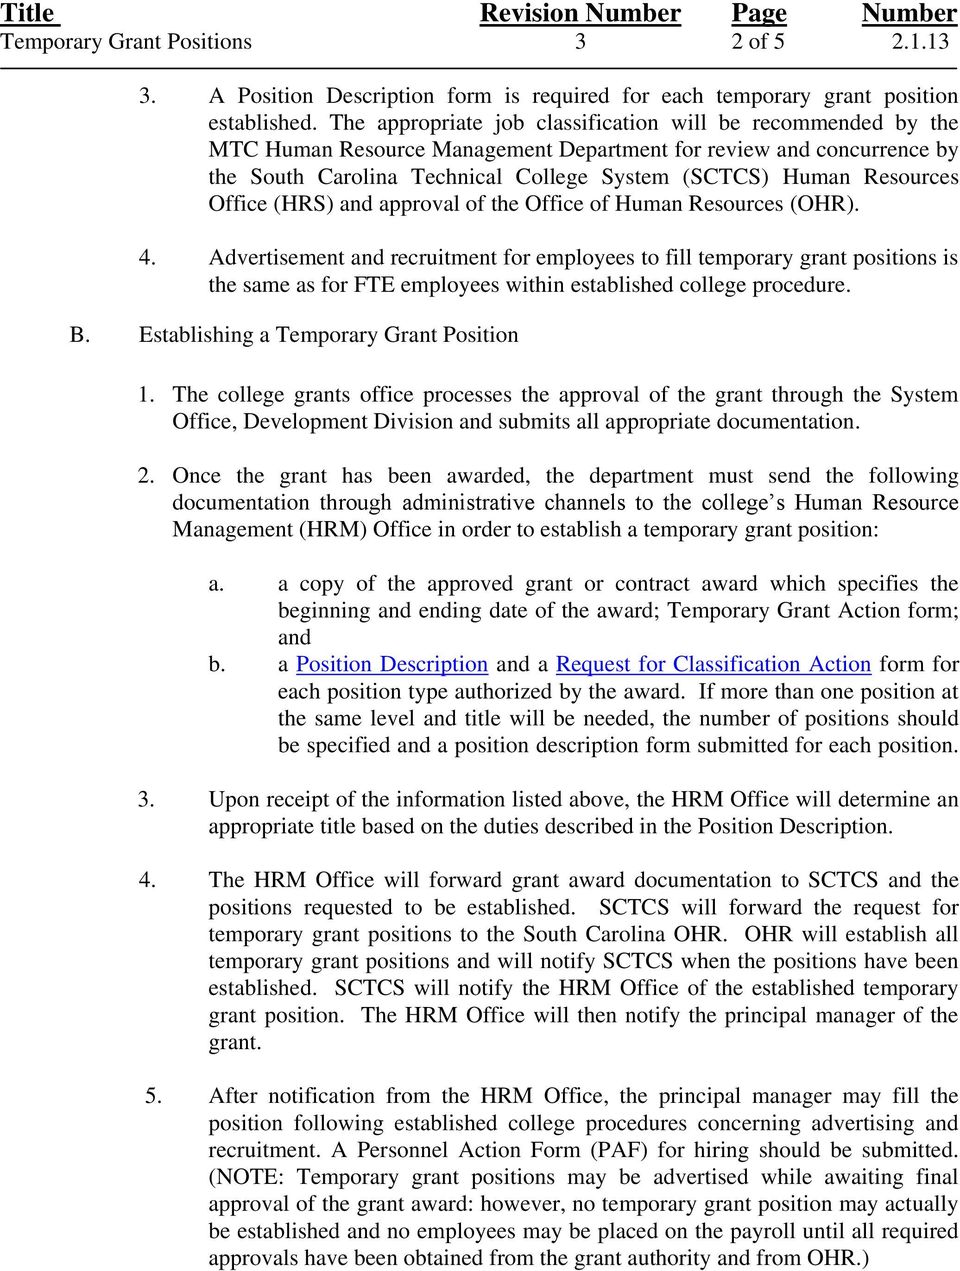 Resources Office (HRS) and approval of the Office of Human Resources (OHR). 4.